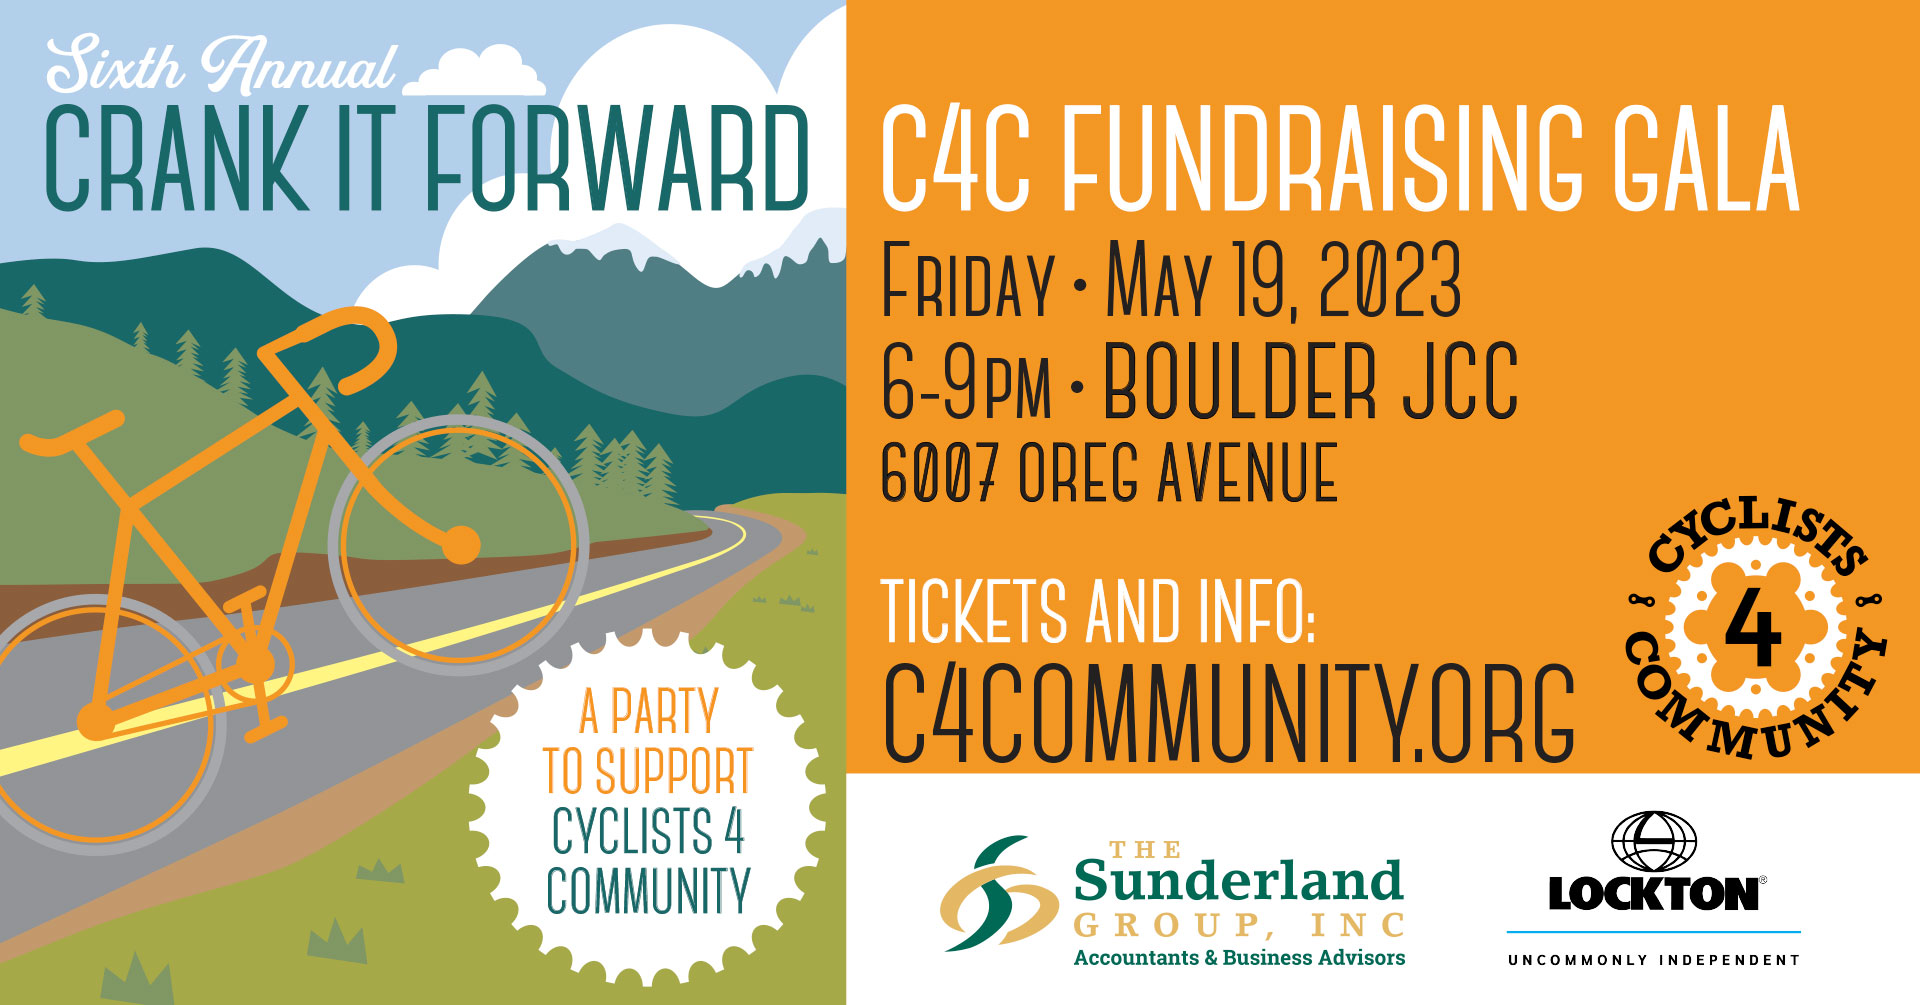 Crank It Forward Tickets Now Available